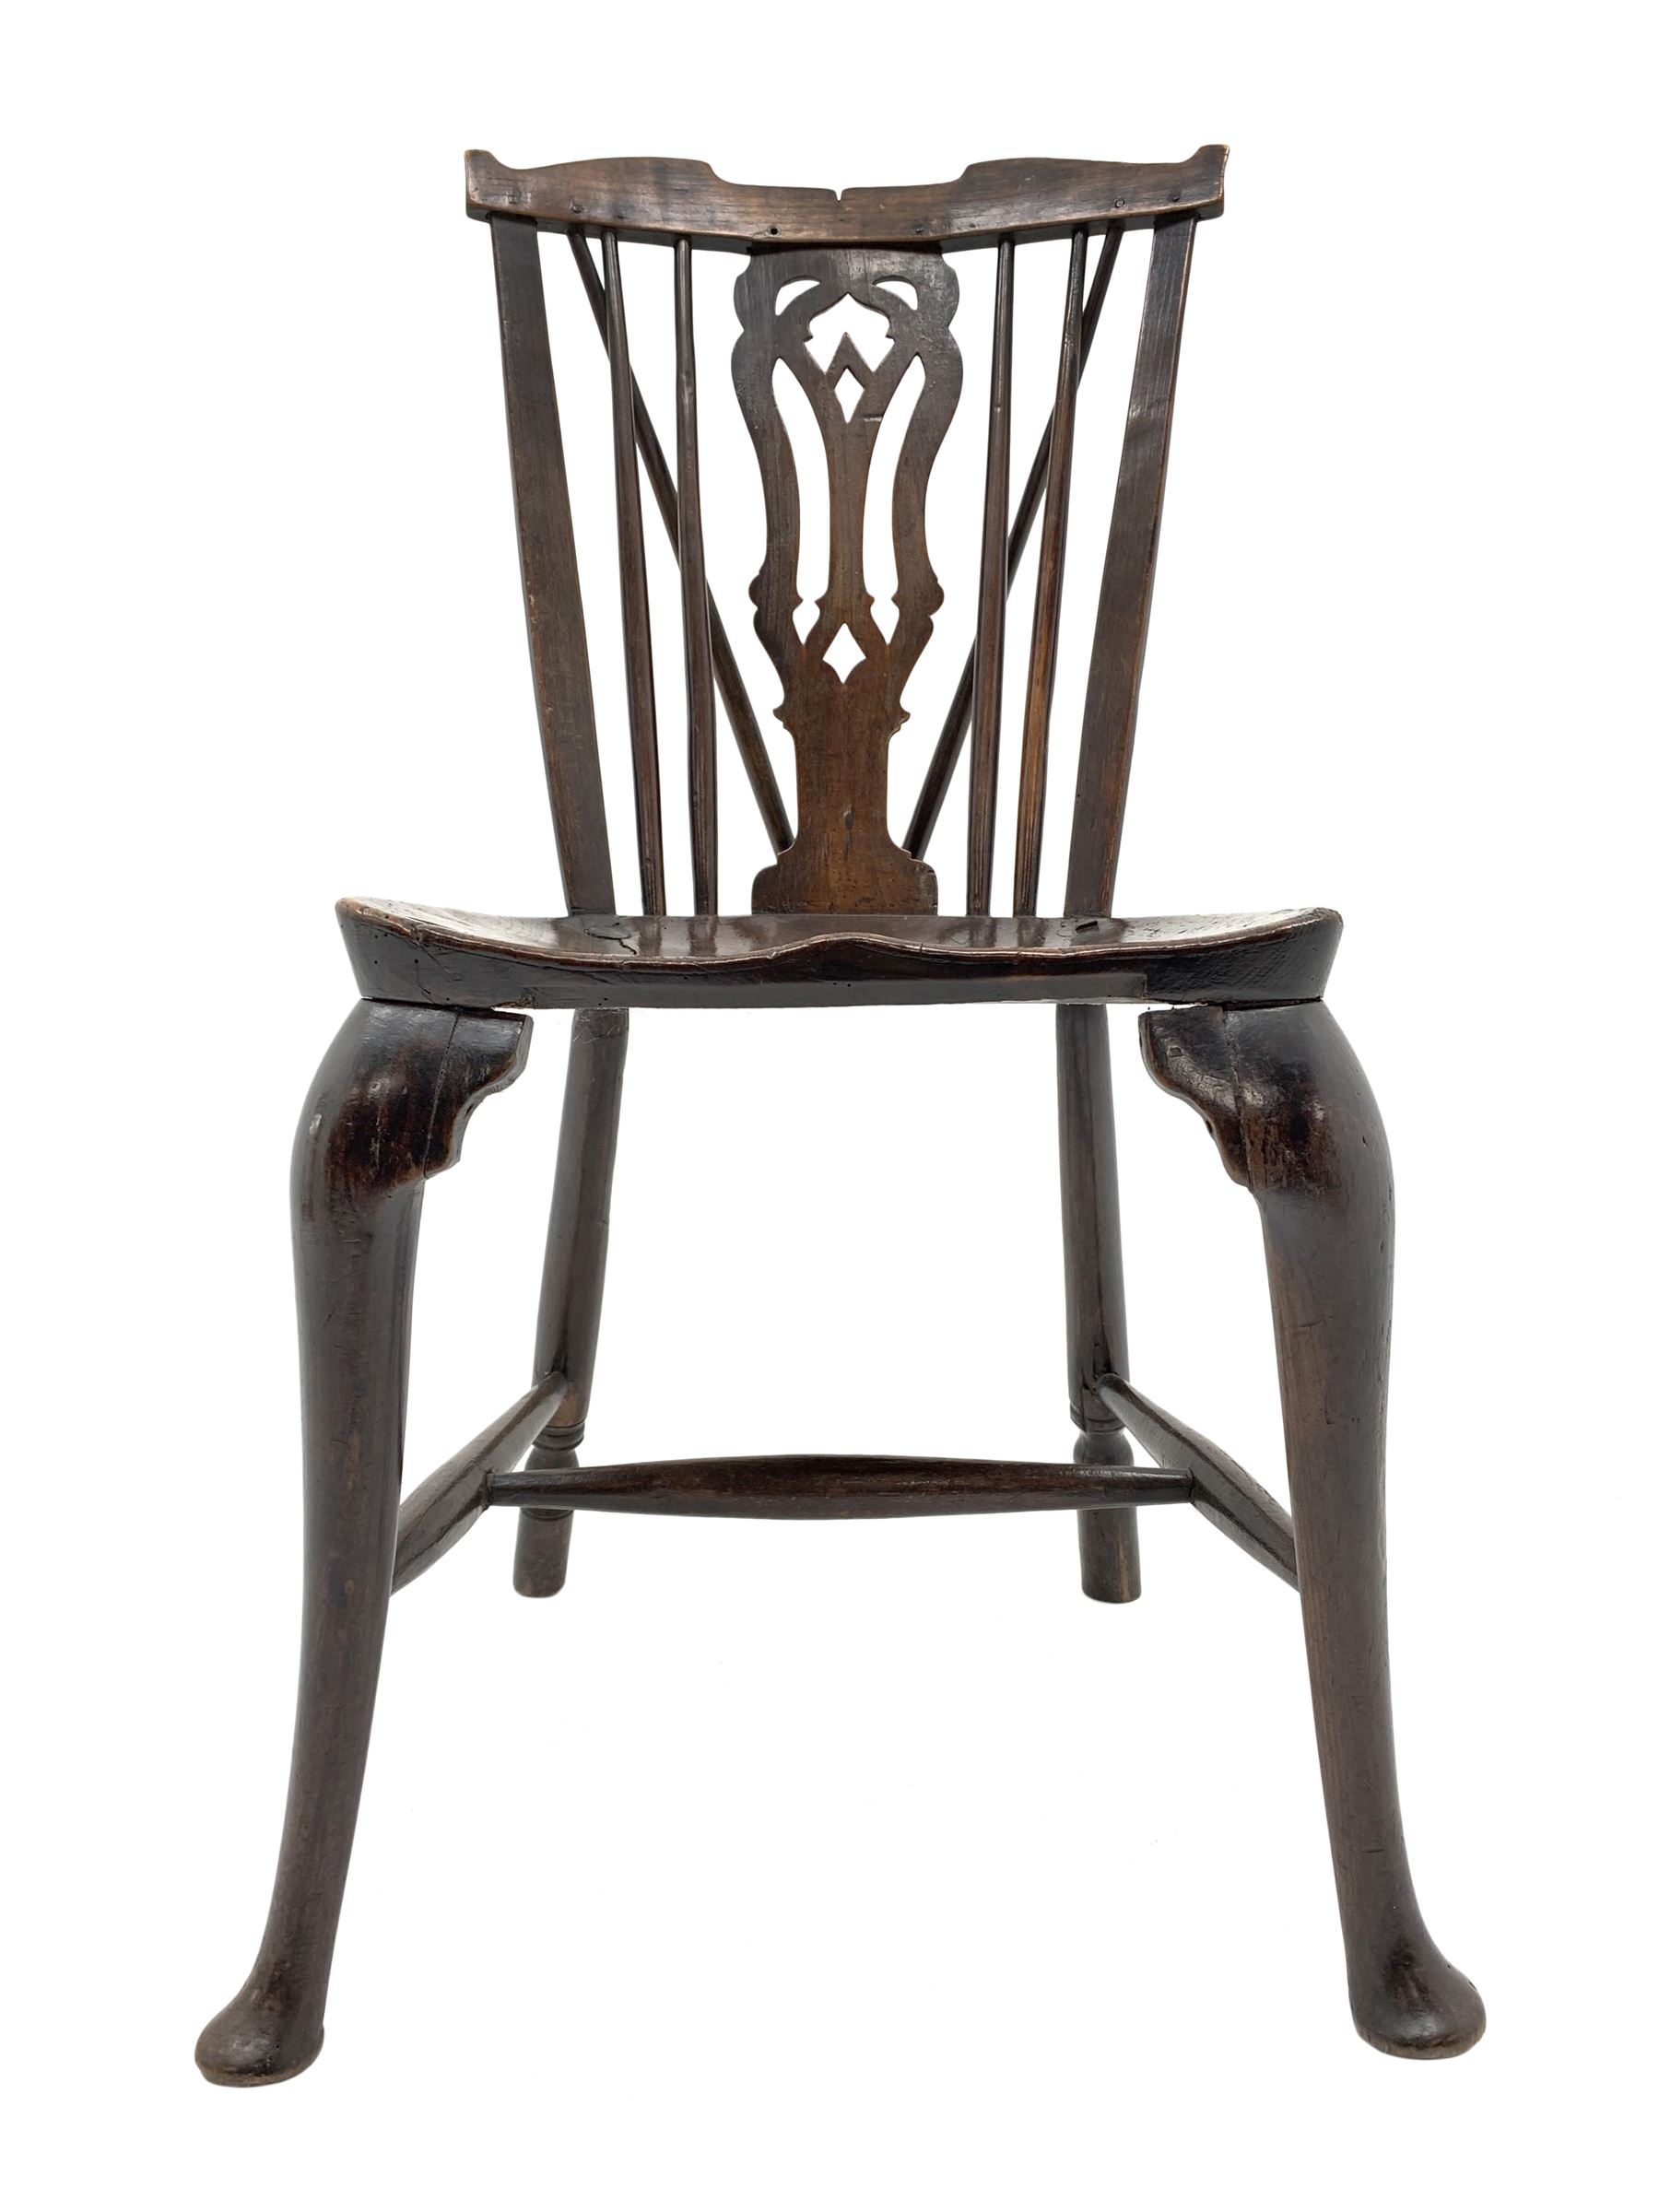 Late 18th century elm and beech Thames Valley Windsor chair